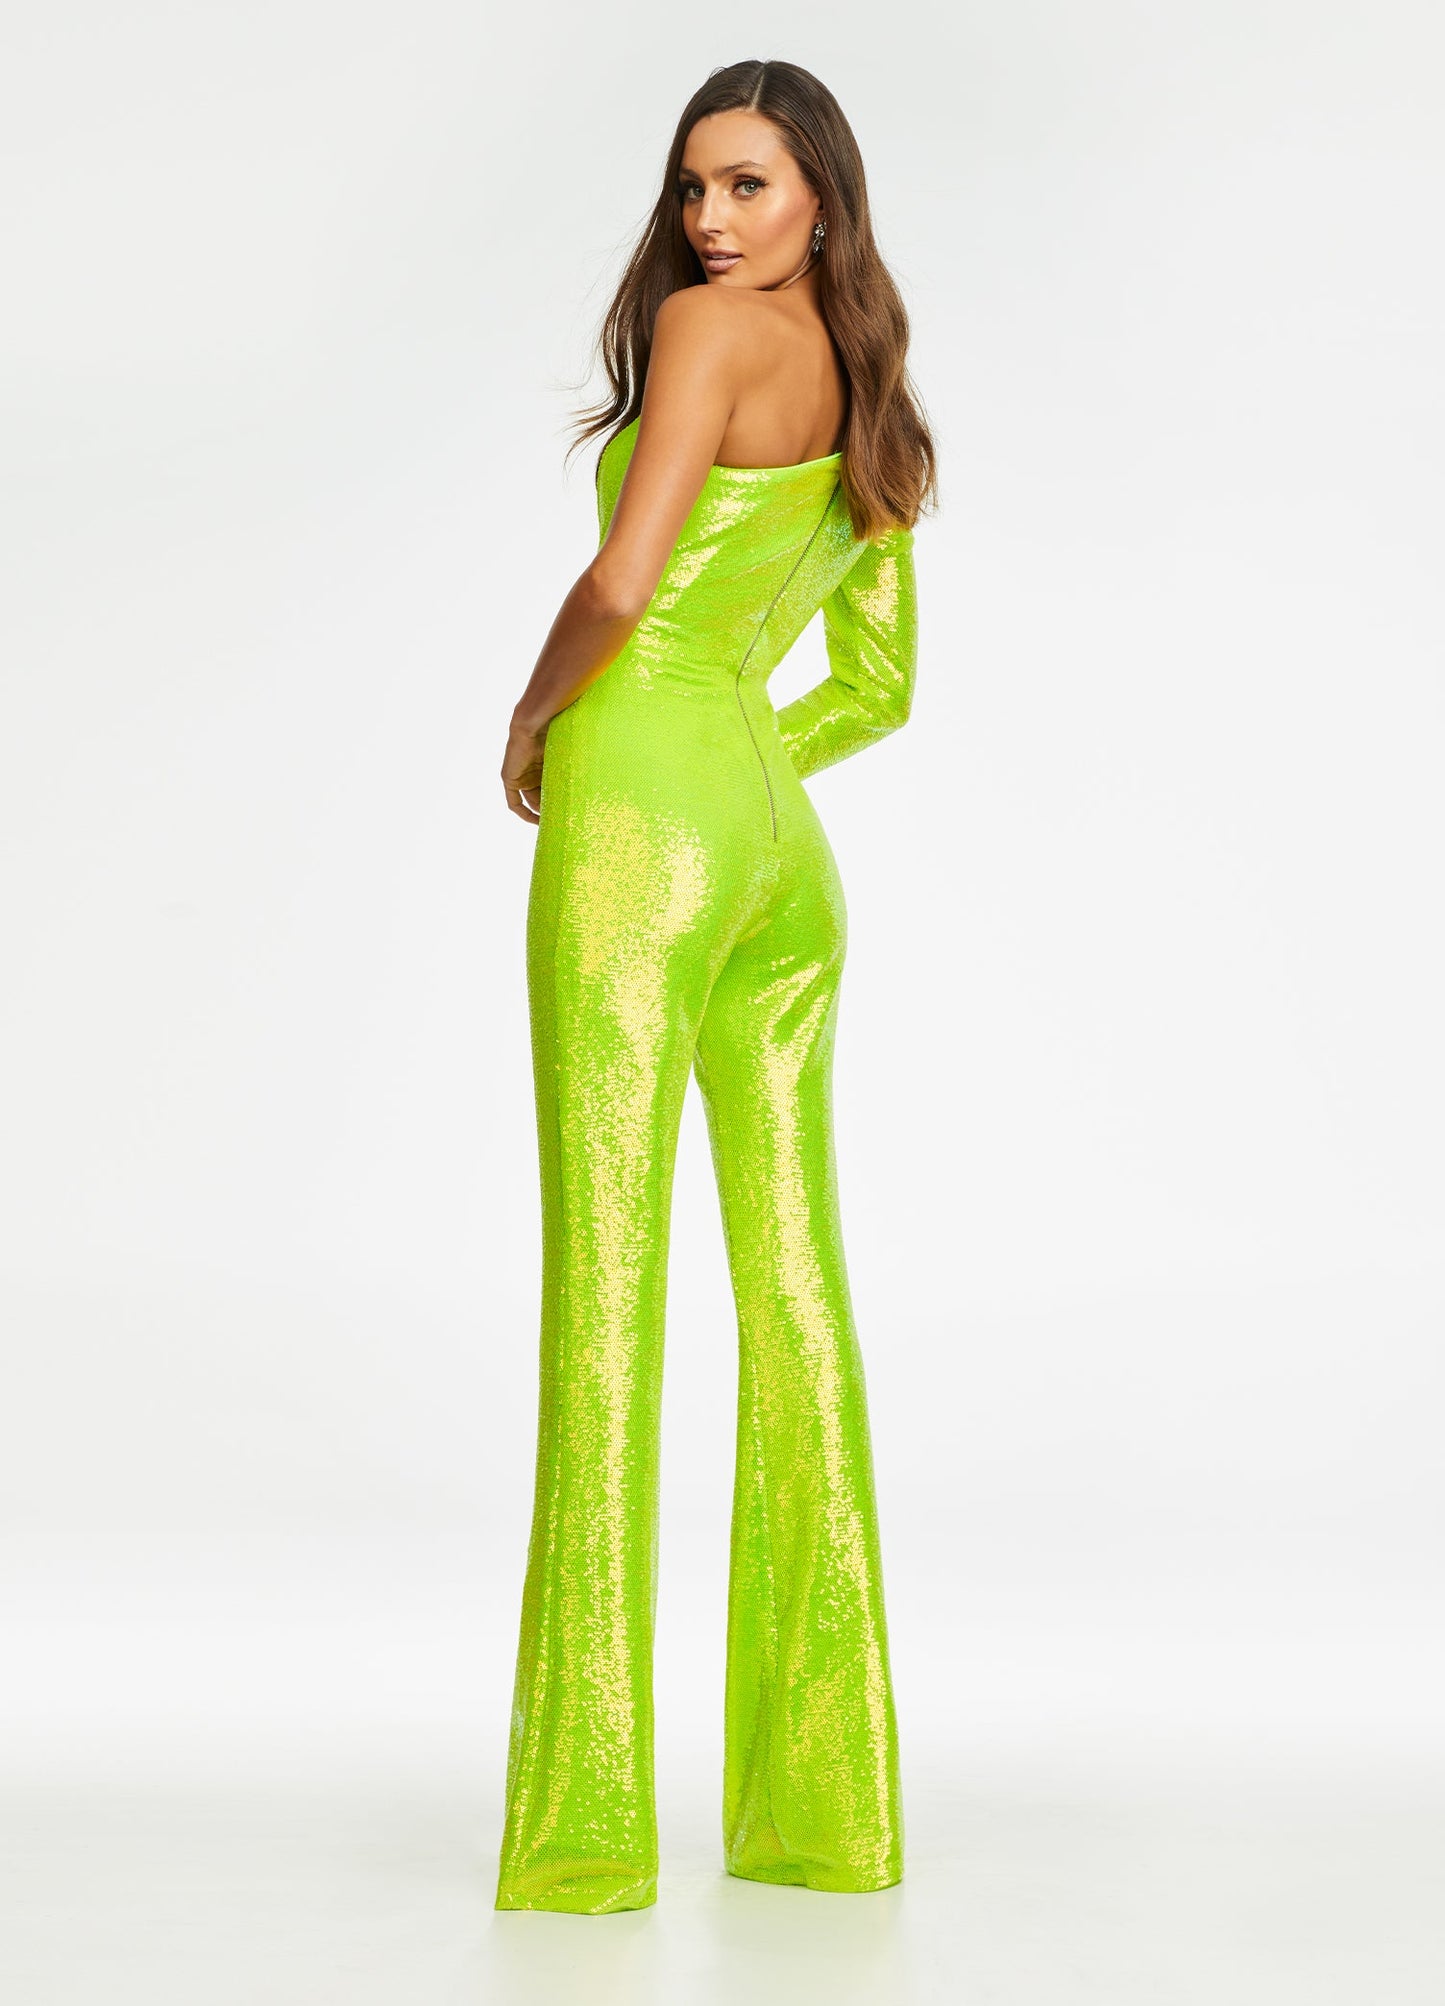 Ashley Lauren 11110 Long Sequin Bell Sleeve Pageant Jumpsuit One Shoulder Bell Bottom We are loving the neon vibes in this sequin one shoulder jumpsuit featuring an industrial zipper back. One Sleeve Exposed Zipper Jumpsuit Sequin Fabric Available Sizes: 0-16 Available Colors: Coral, Lilac, Neon Green, Yellow